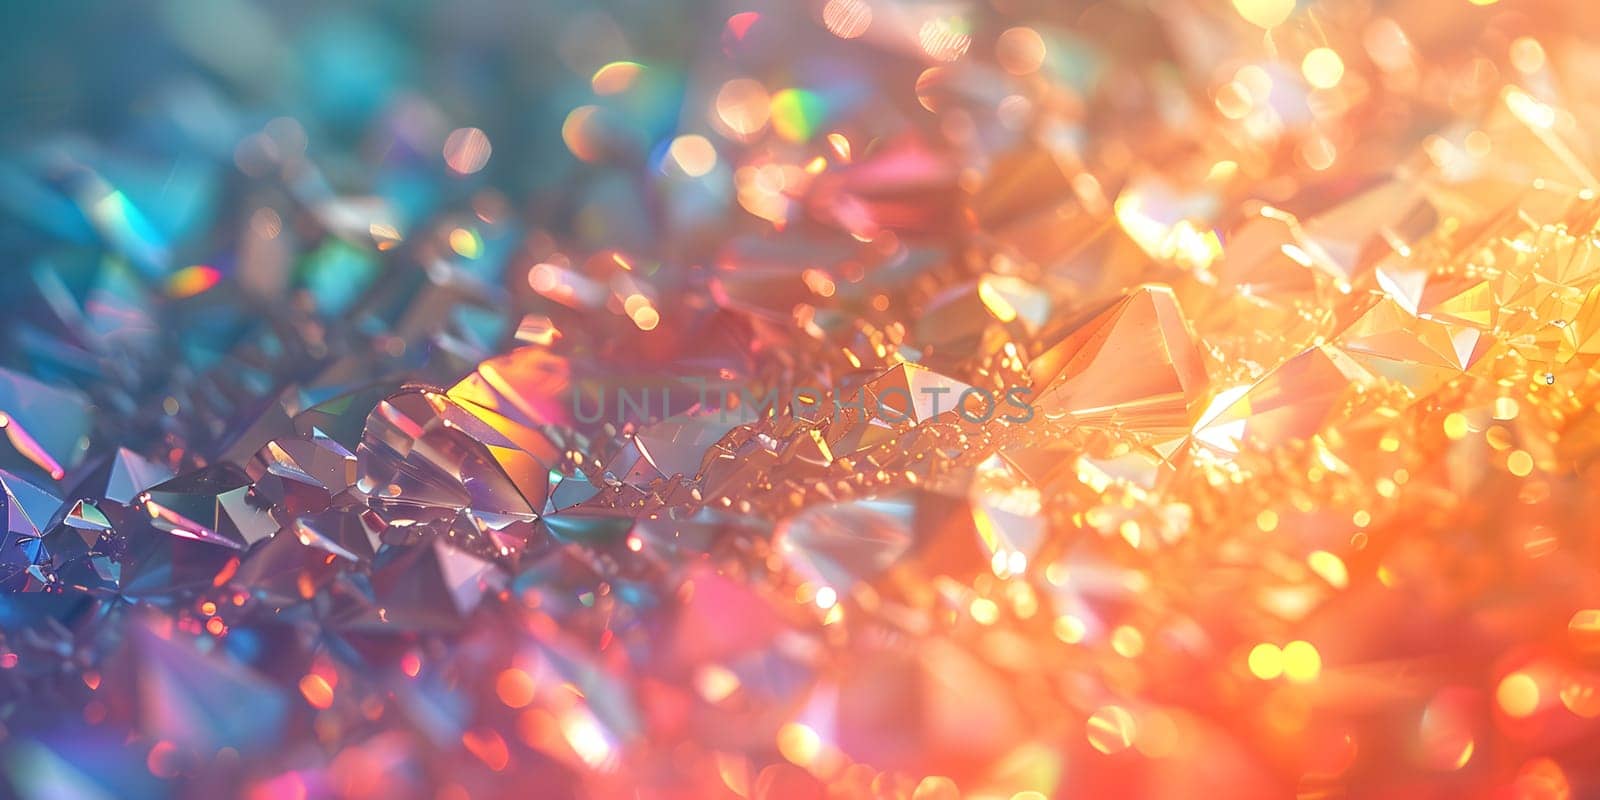 A macro photograph showcasing a fluid and colorful background with sparkles, featuring electric blue, magenta, and carmine hues. A stunning natural material as a fashion accessory or in cuisine